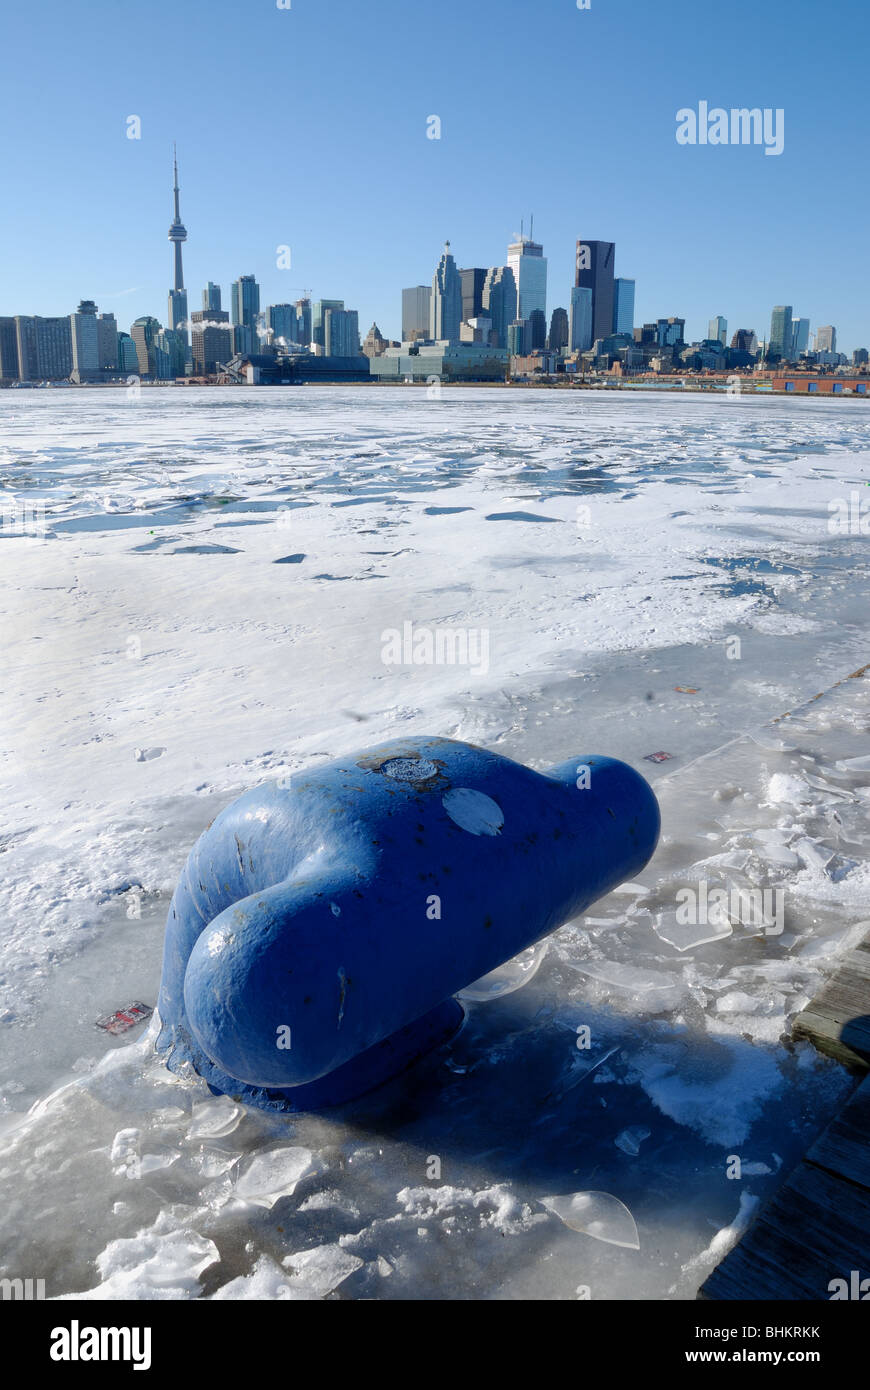 A view of Toronto harbour's shipping port in winter Stock Photo